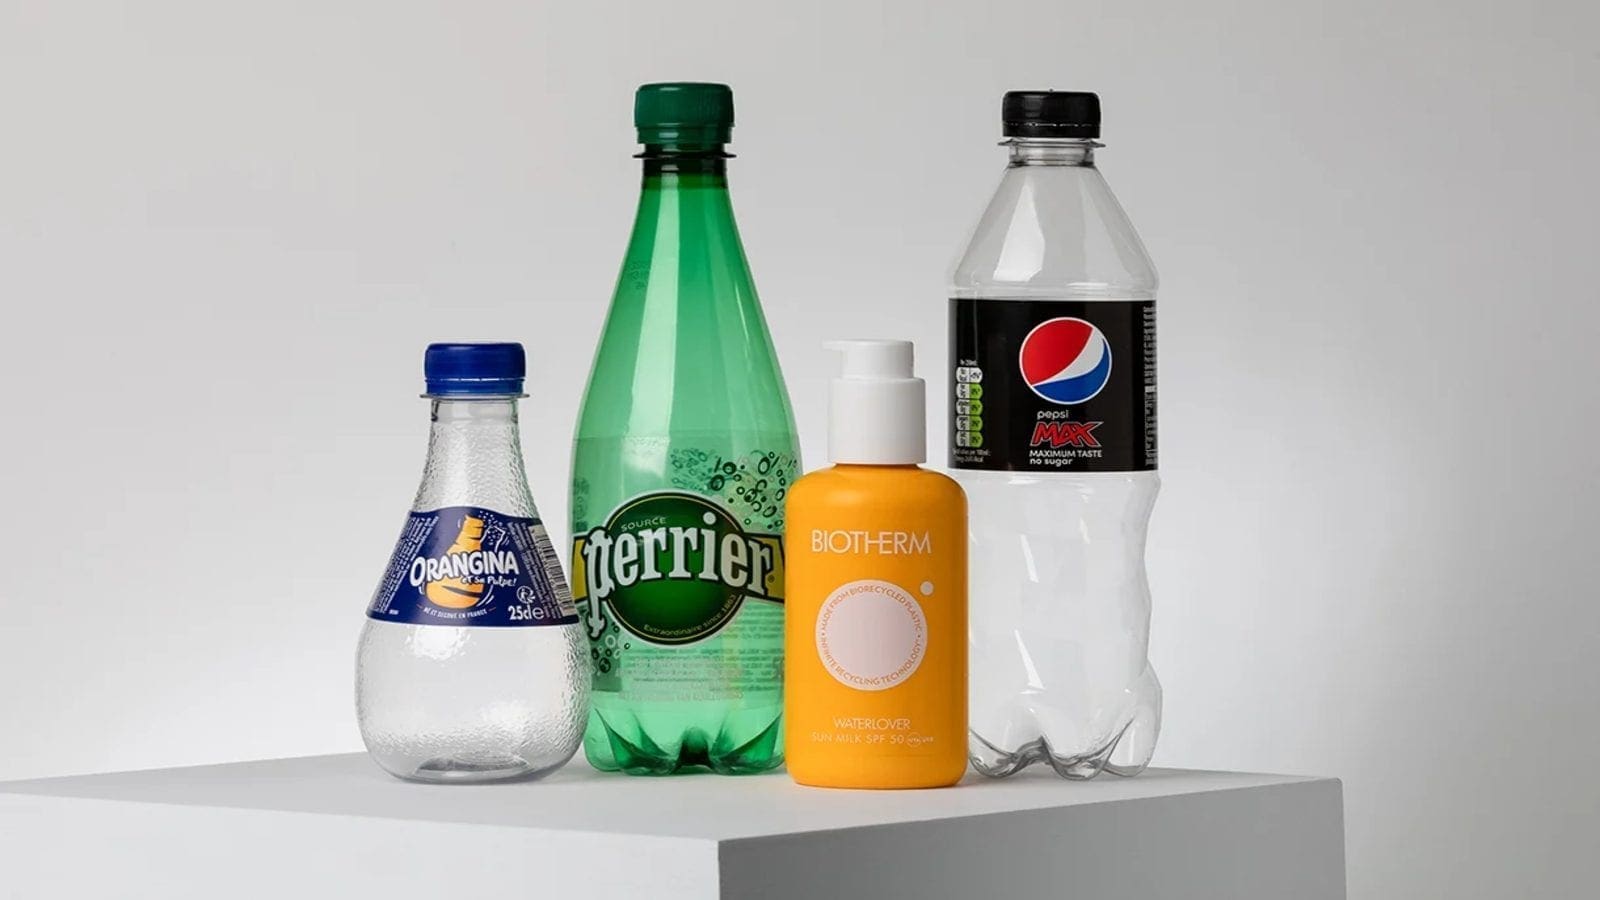 Food beverage majors partner with Carbios to launch world’s first enzymatically recycled bottles